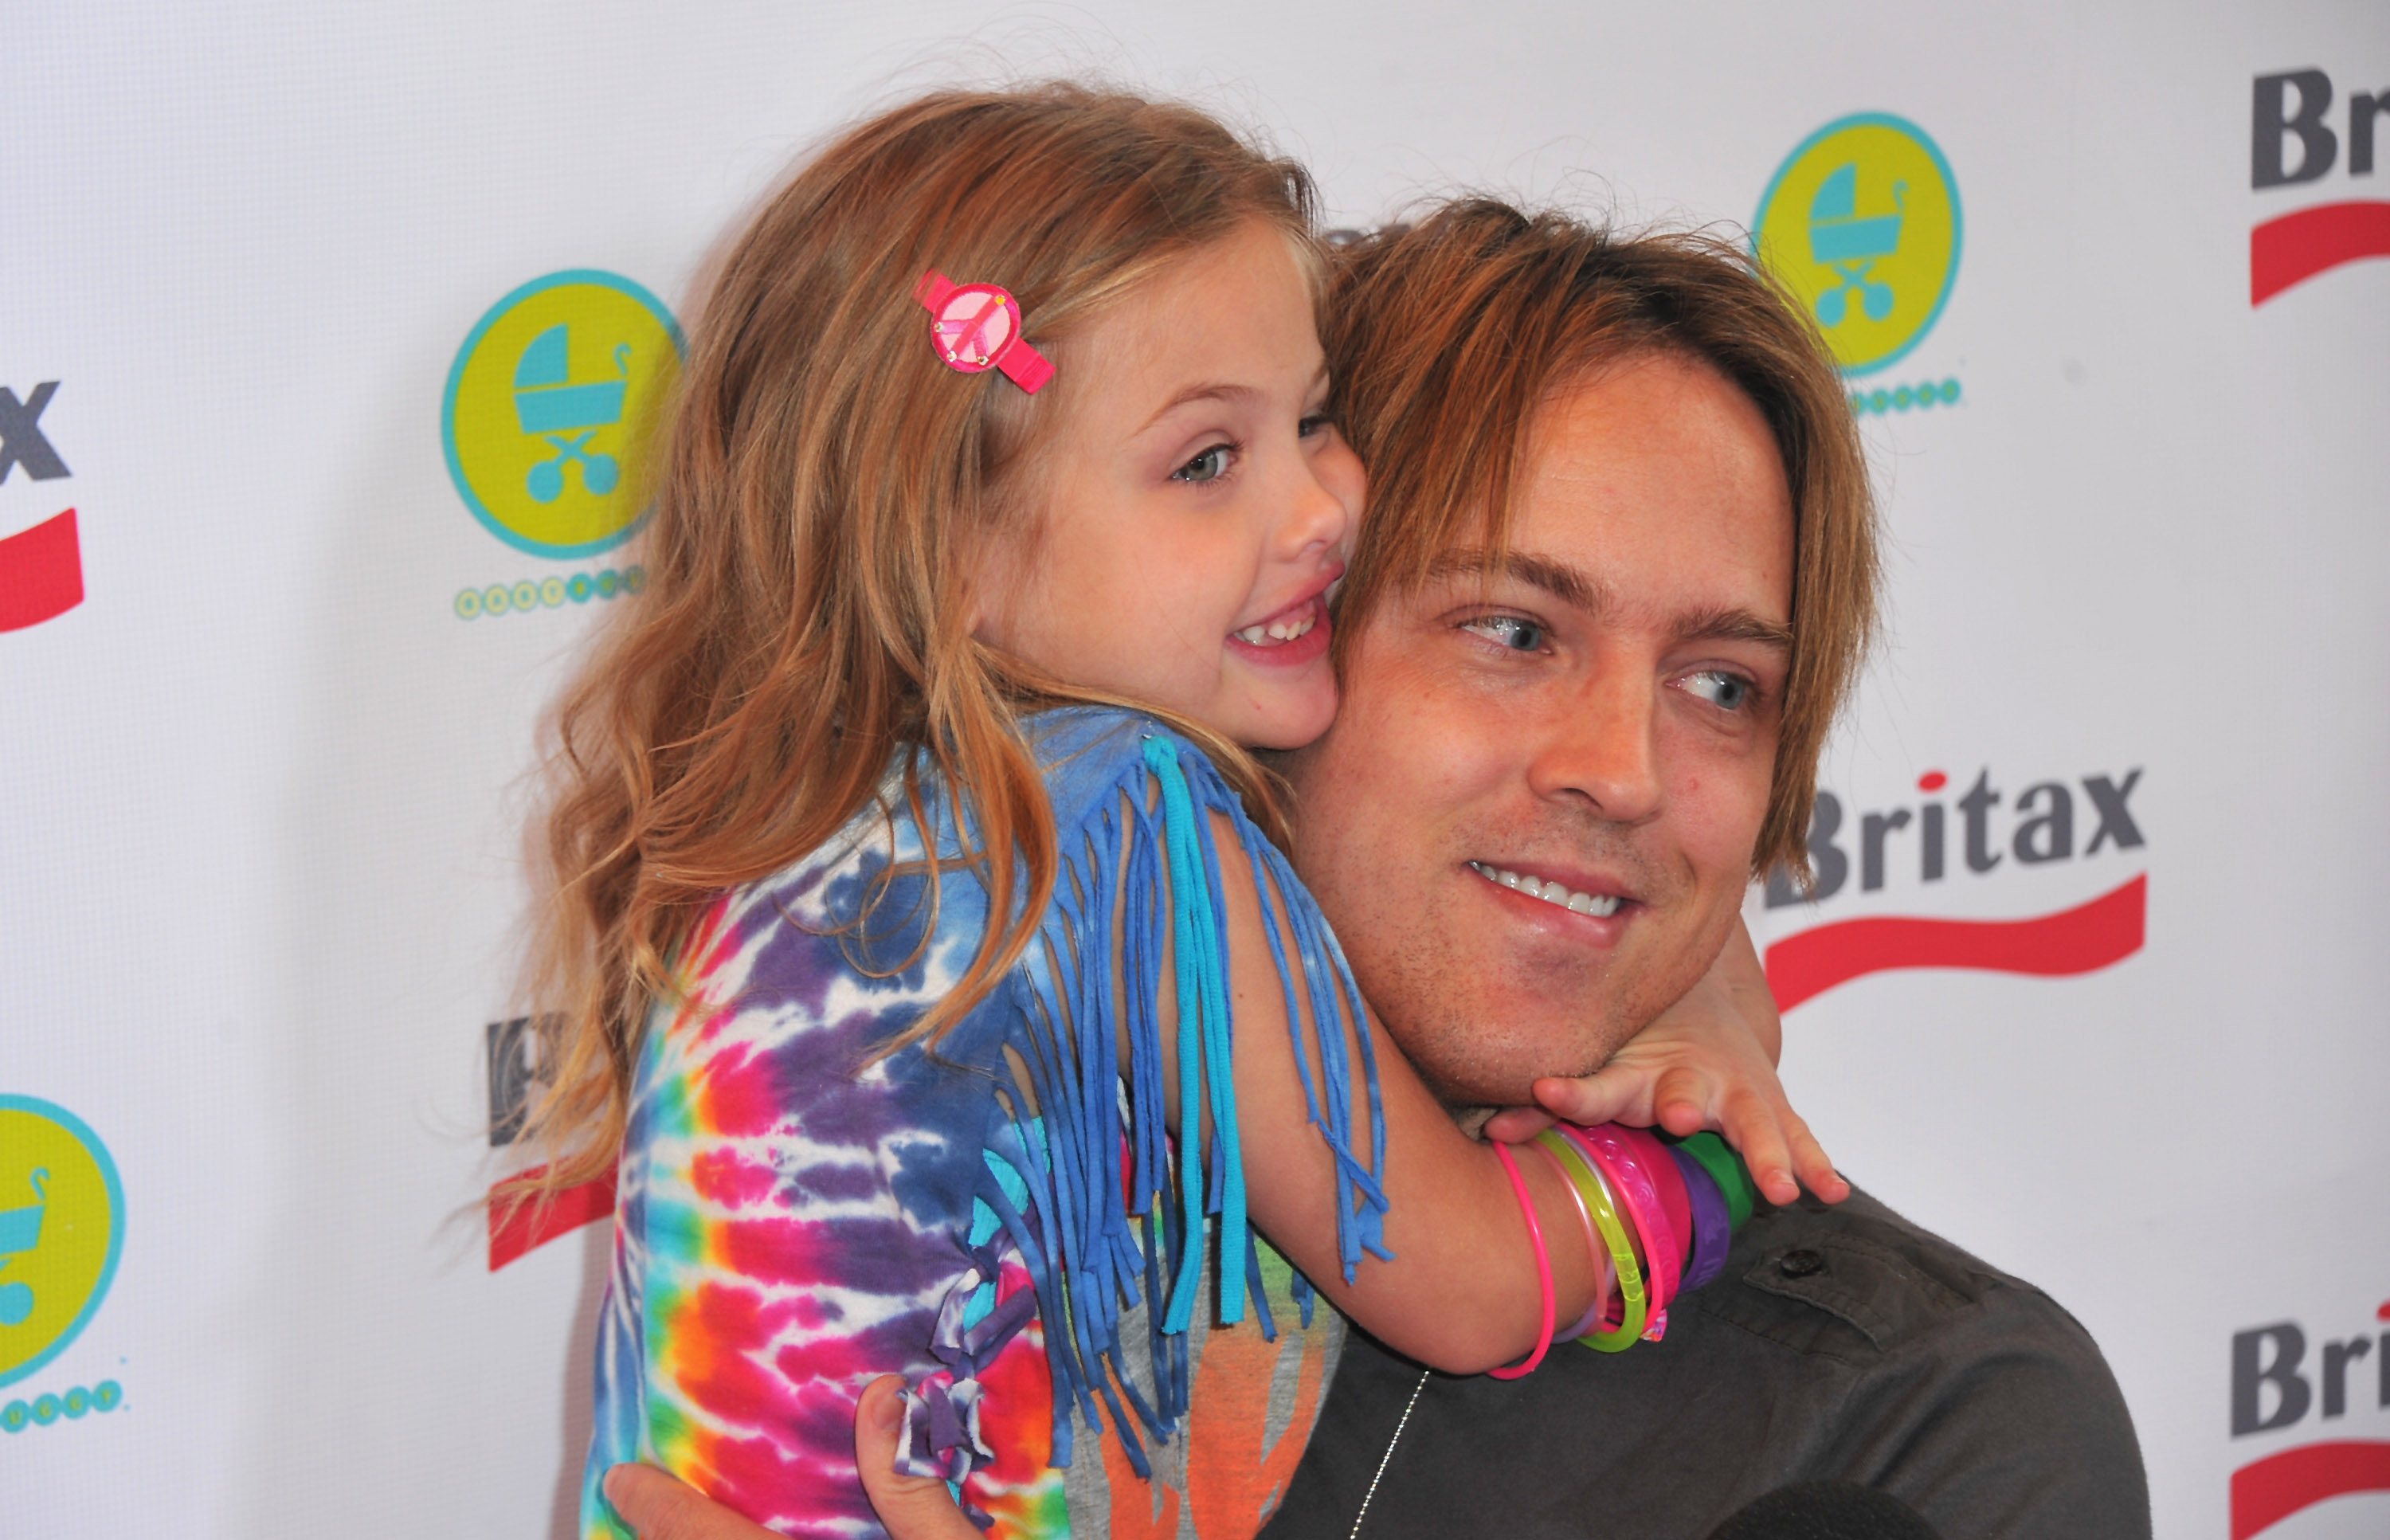 Dannielynn Birkhead and photographer Larry Birkhead attend a pre-Father's Day Mini Golf Open hosted by Britax and Baby Buggy at Castle Park, on June 11, 2011, in Sherman Oaks, California. | Source: Getty Images